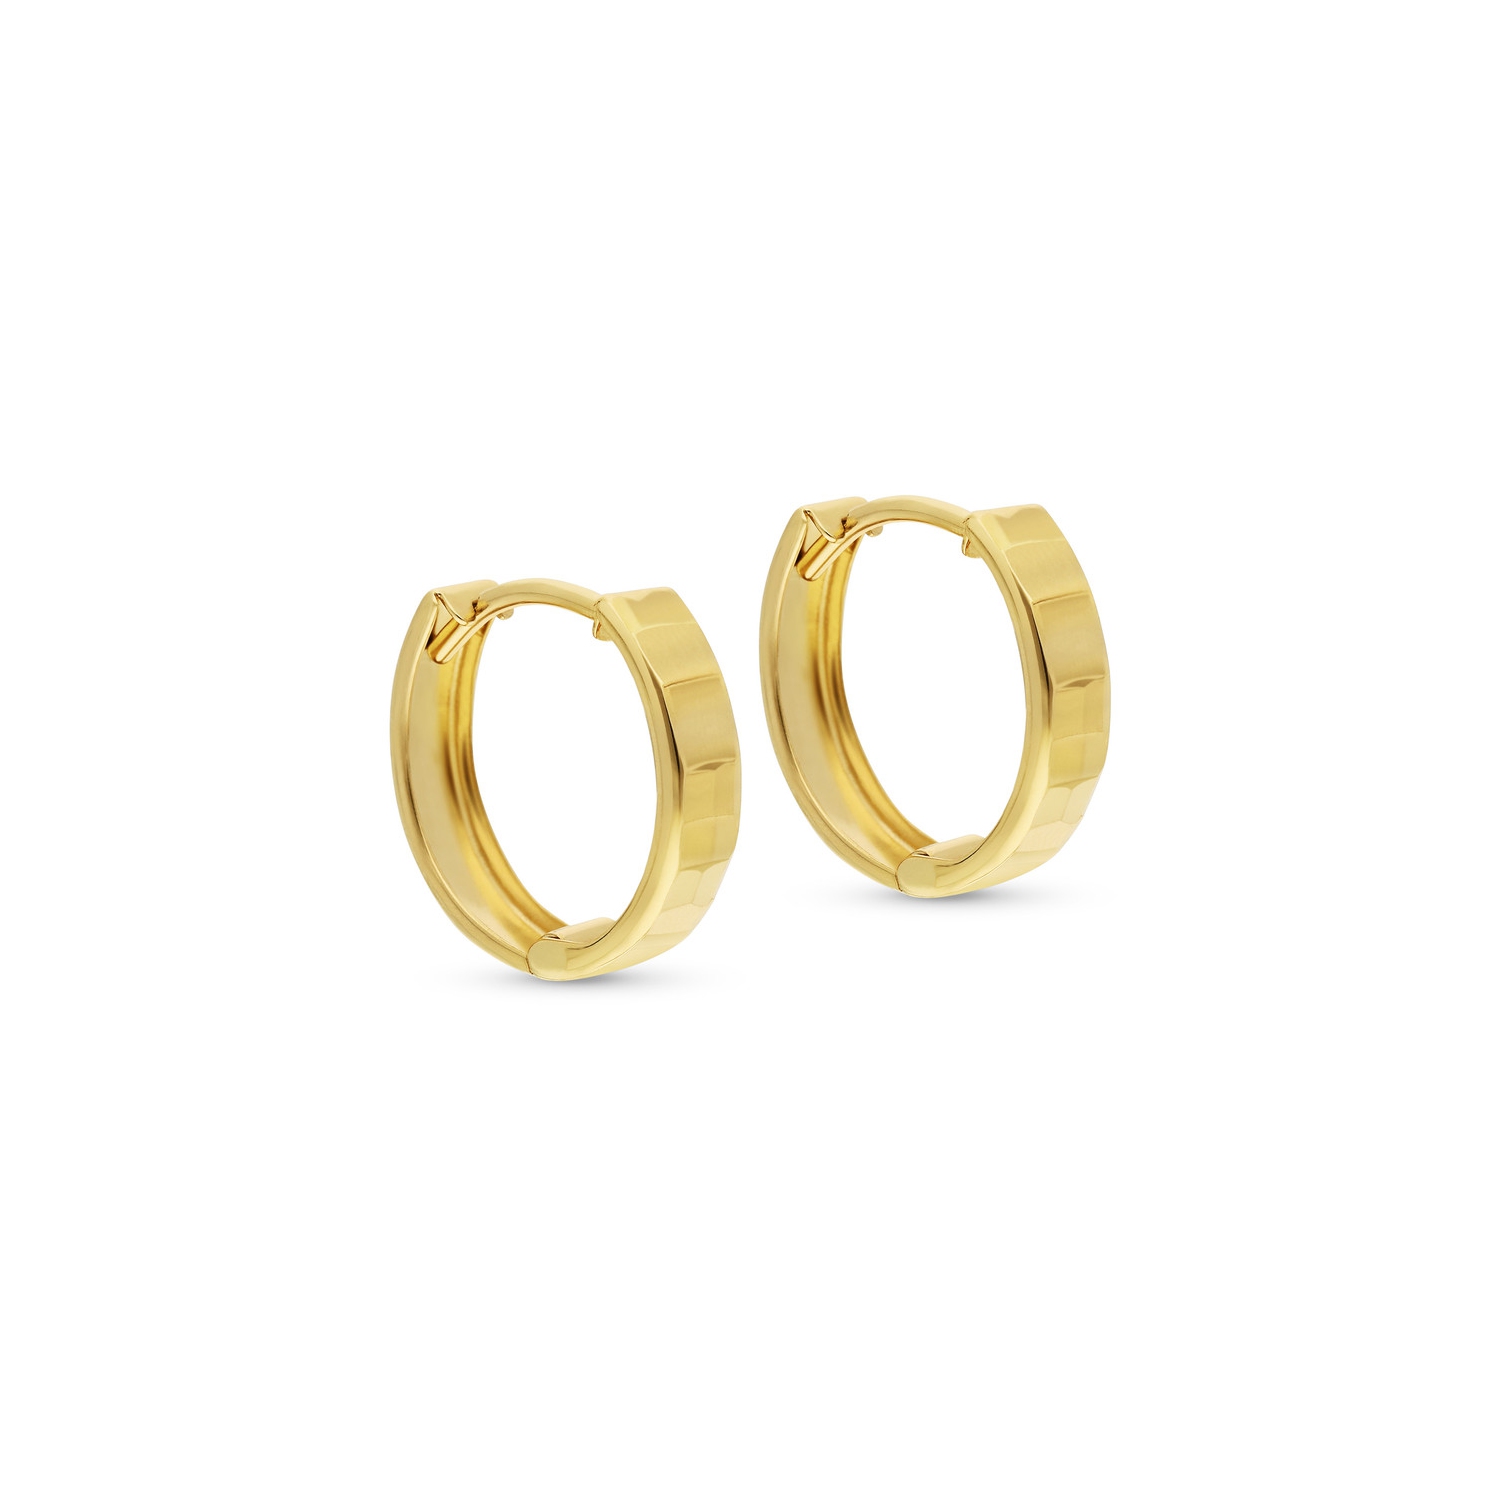 10kt Yellow Gold Polished Huggy Earring